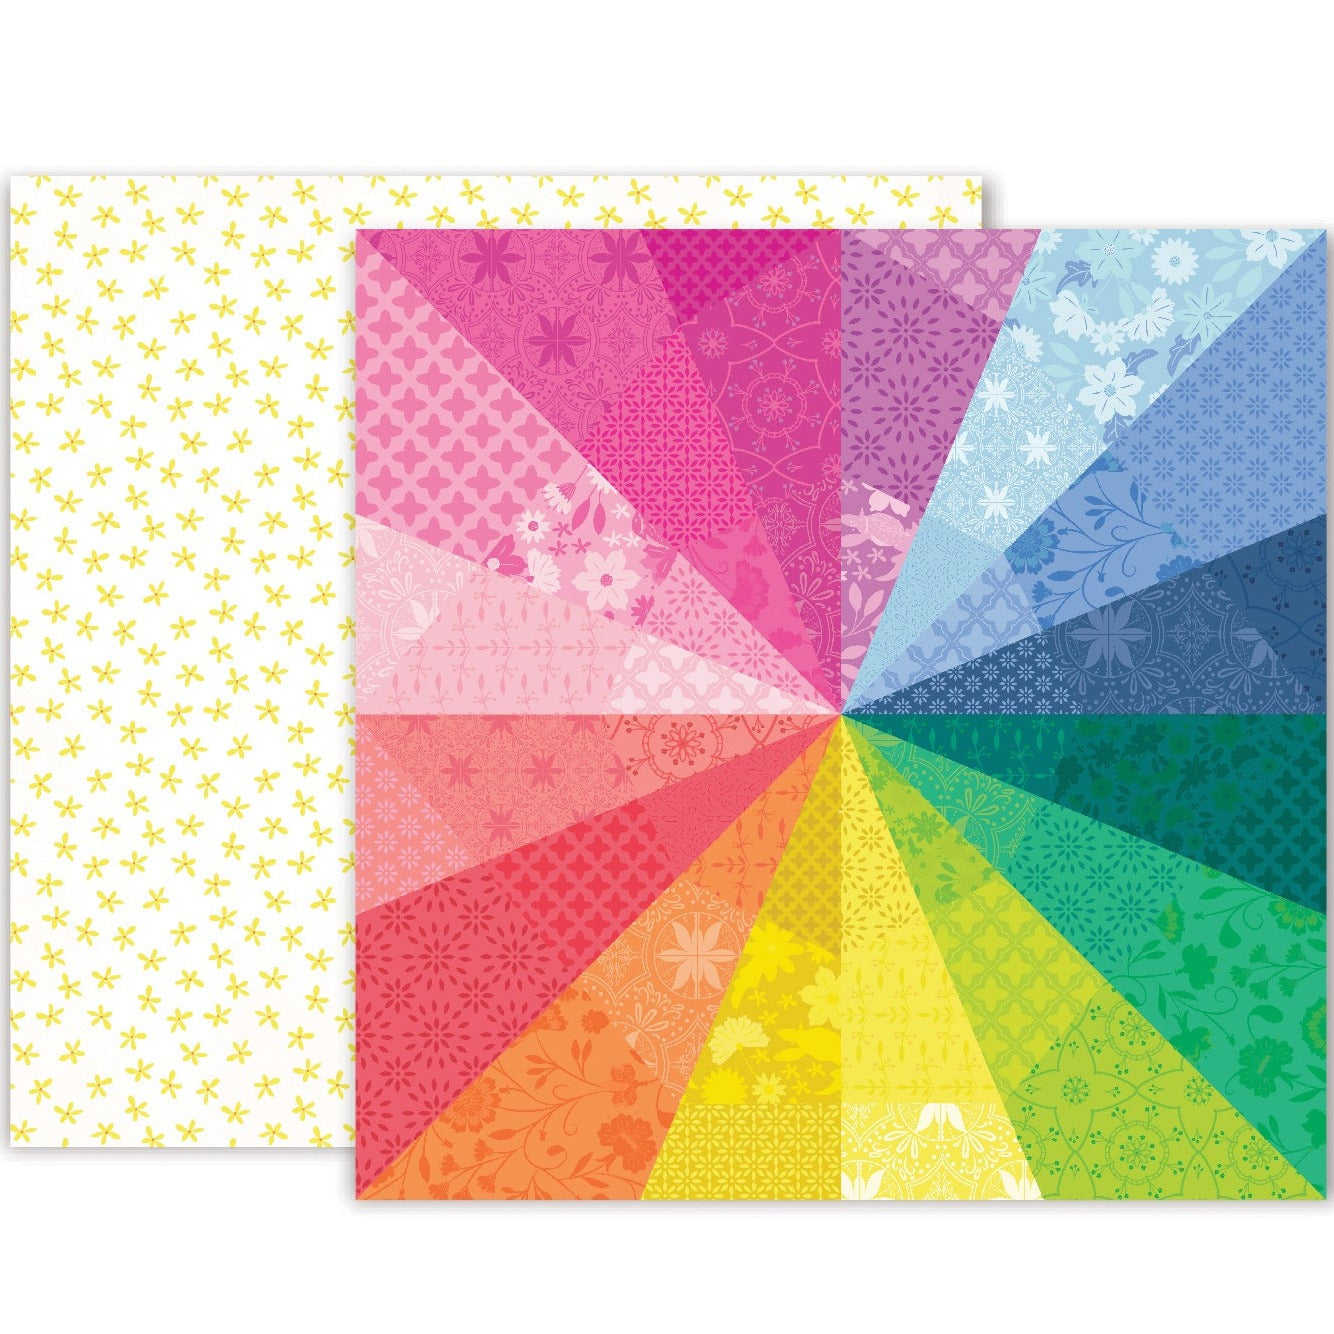 12x12 double-sided, patterned cardstock with colorful rainbow design on front and lime-green flowers on ivory background reverse - Pink Paislee